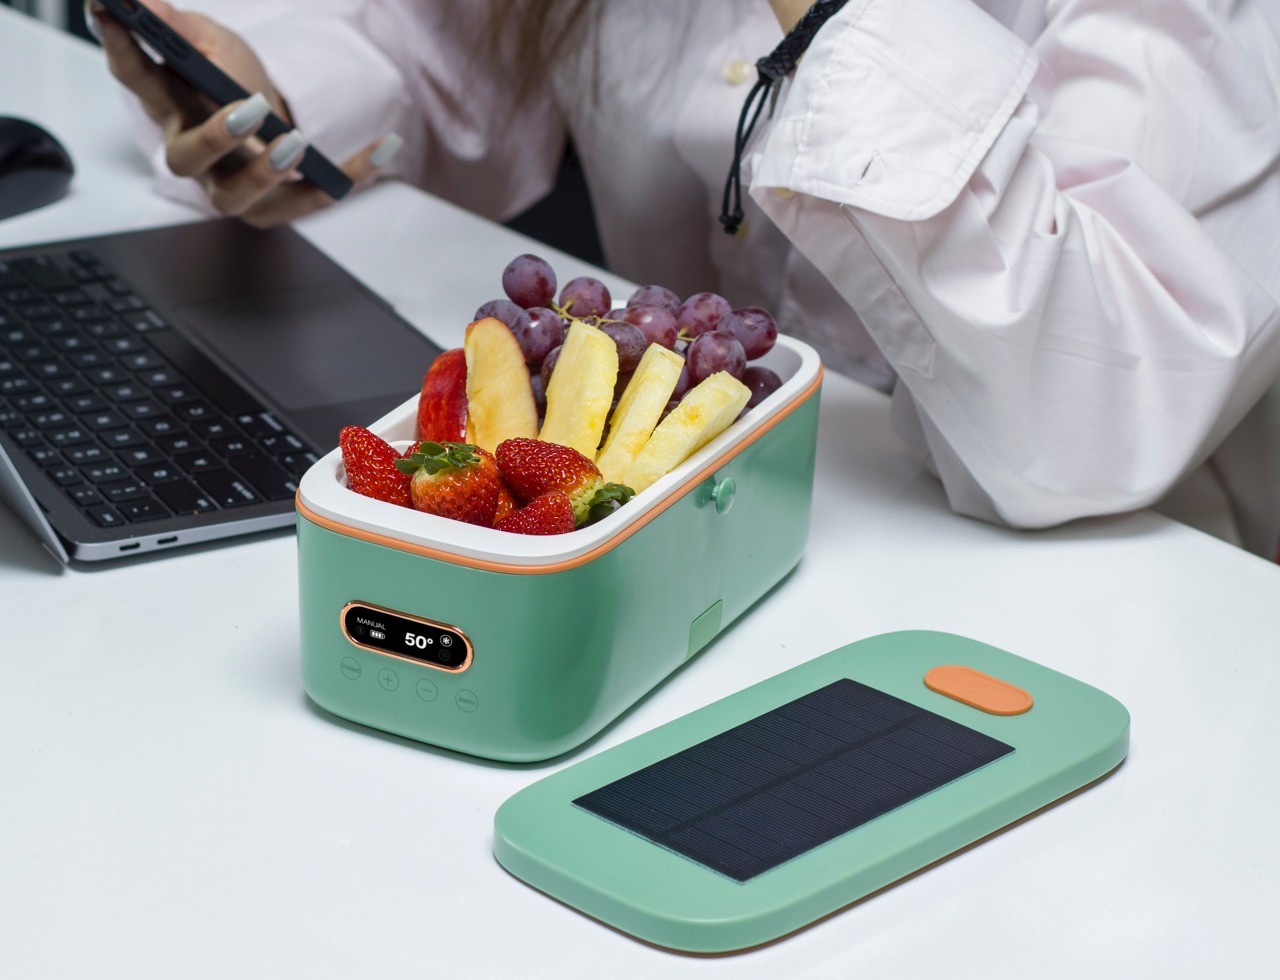 Top 10 heated lunch box ideas and inspiration